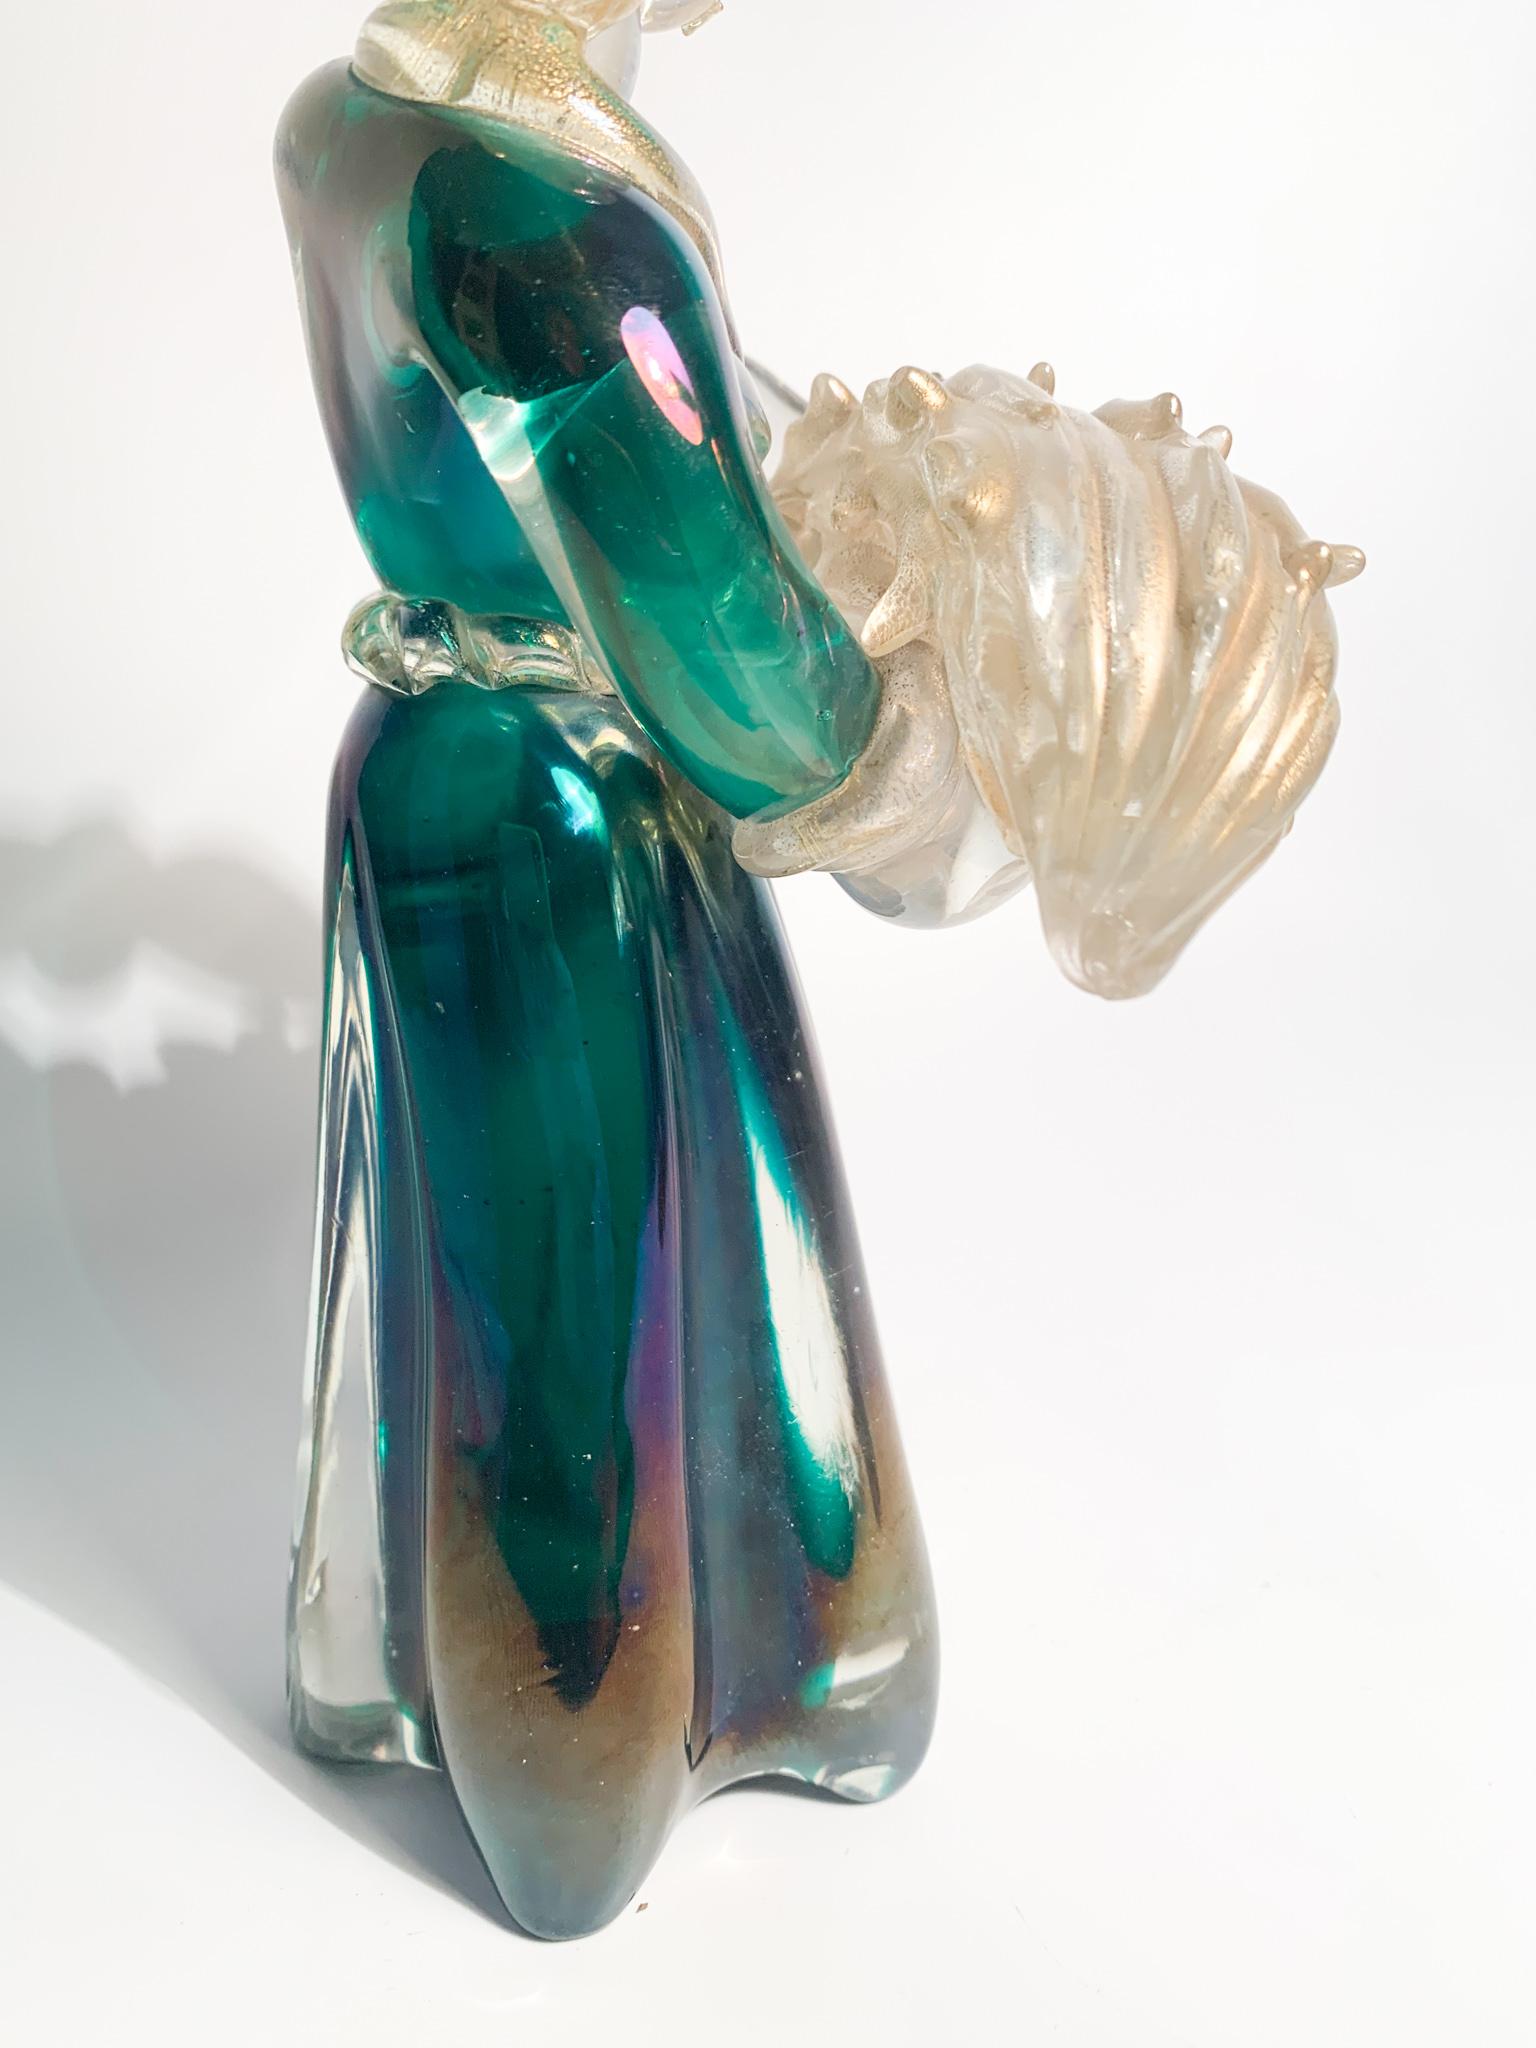 Iridescent Murano Glass Sculpture with Gold Leaves by Archimede Seguso 1940s For Sale 1